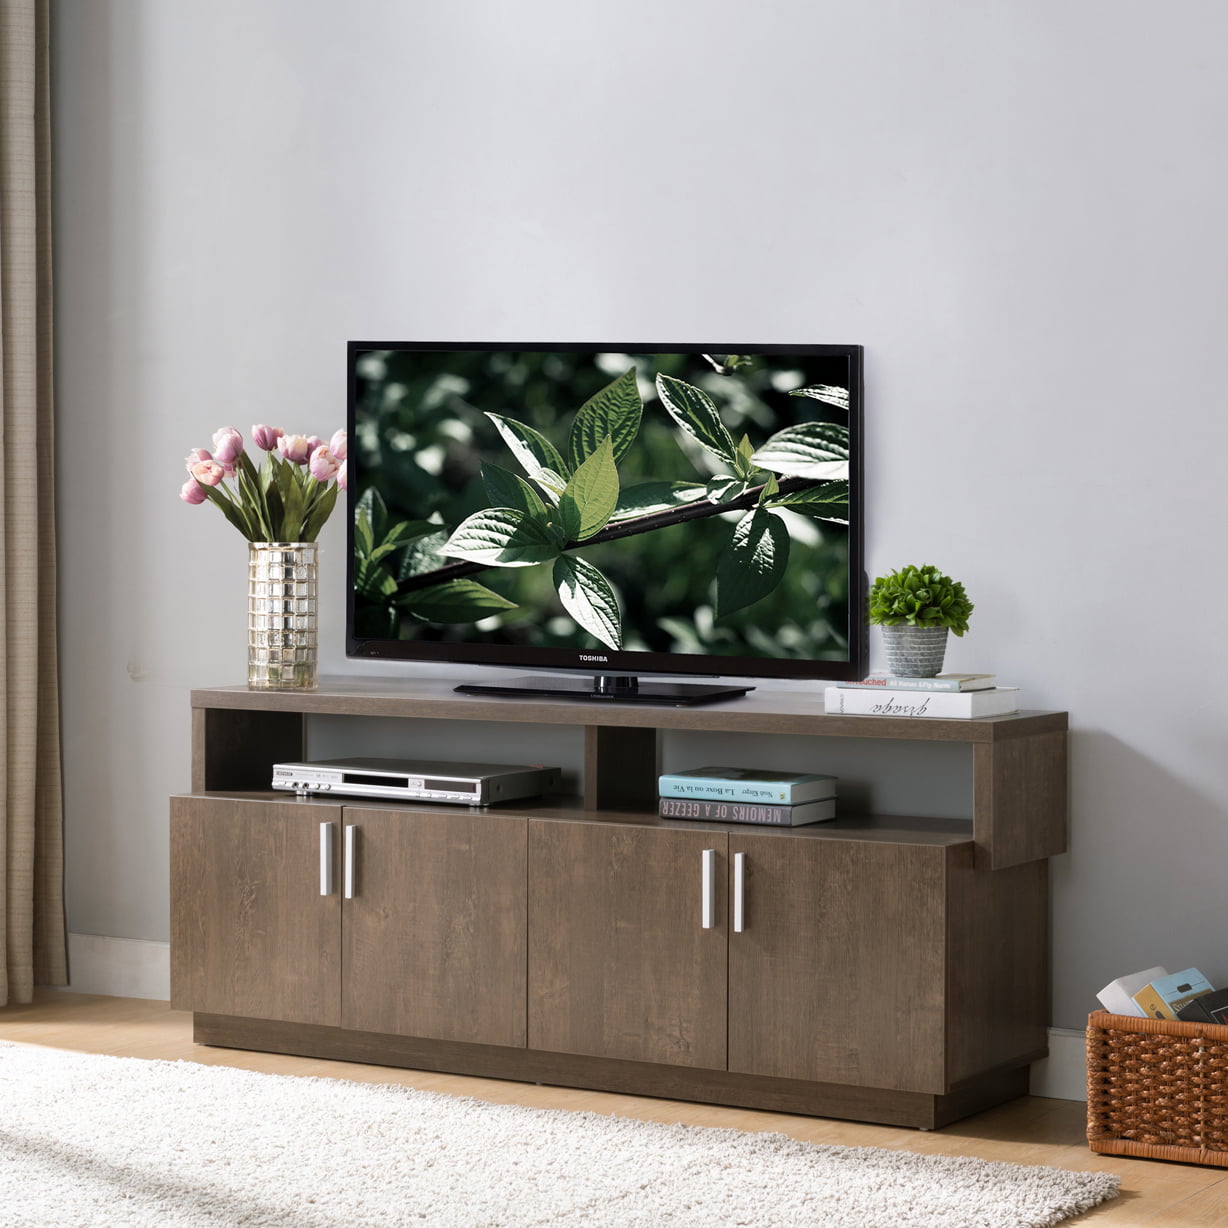 TV Stand 60 inch Flat Screen Console Home Furniture Entertainment Center Media